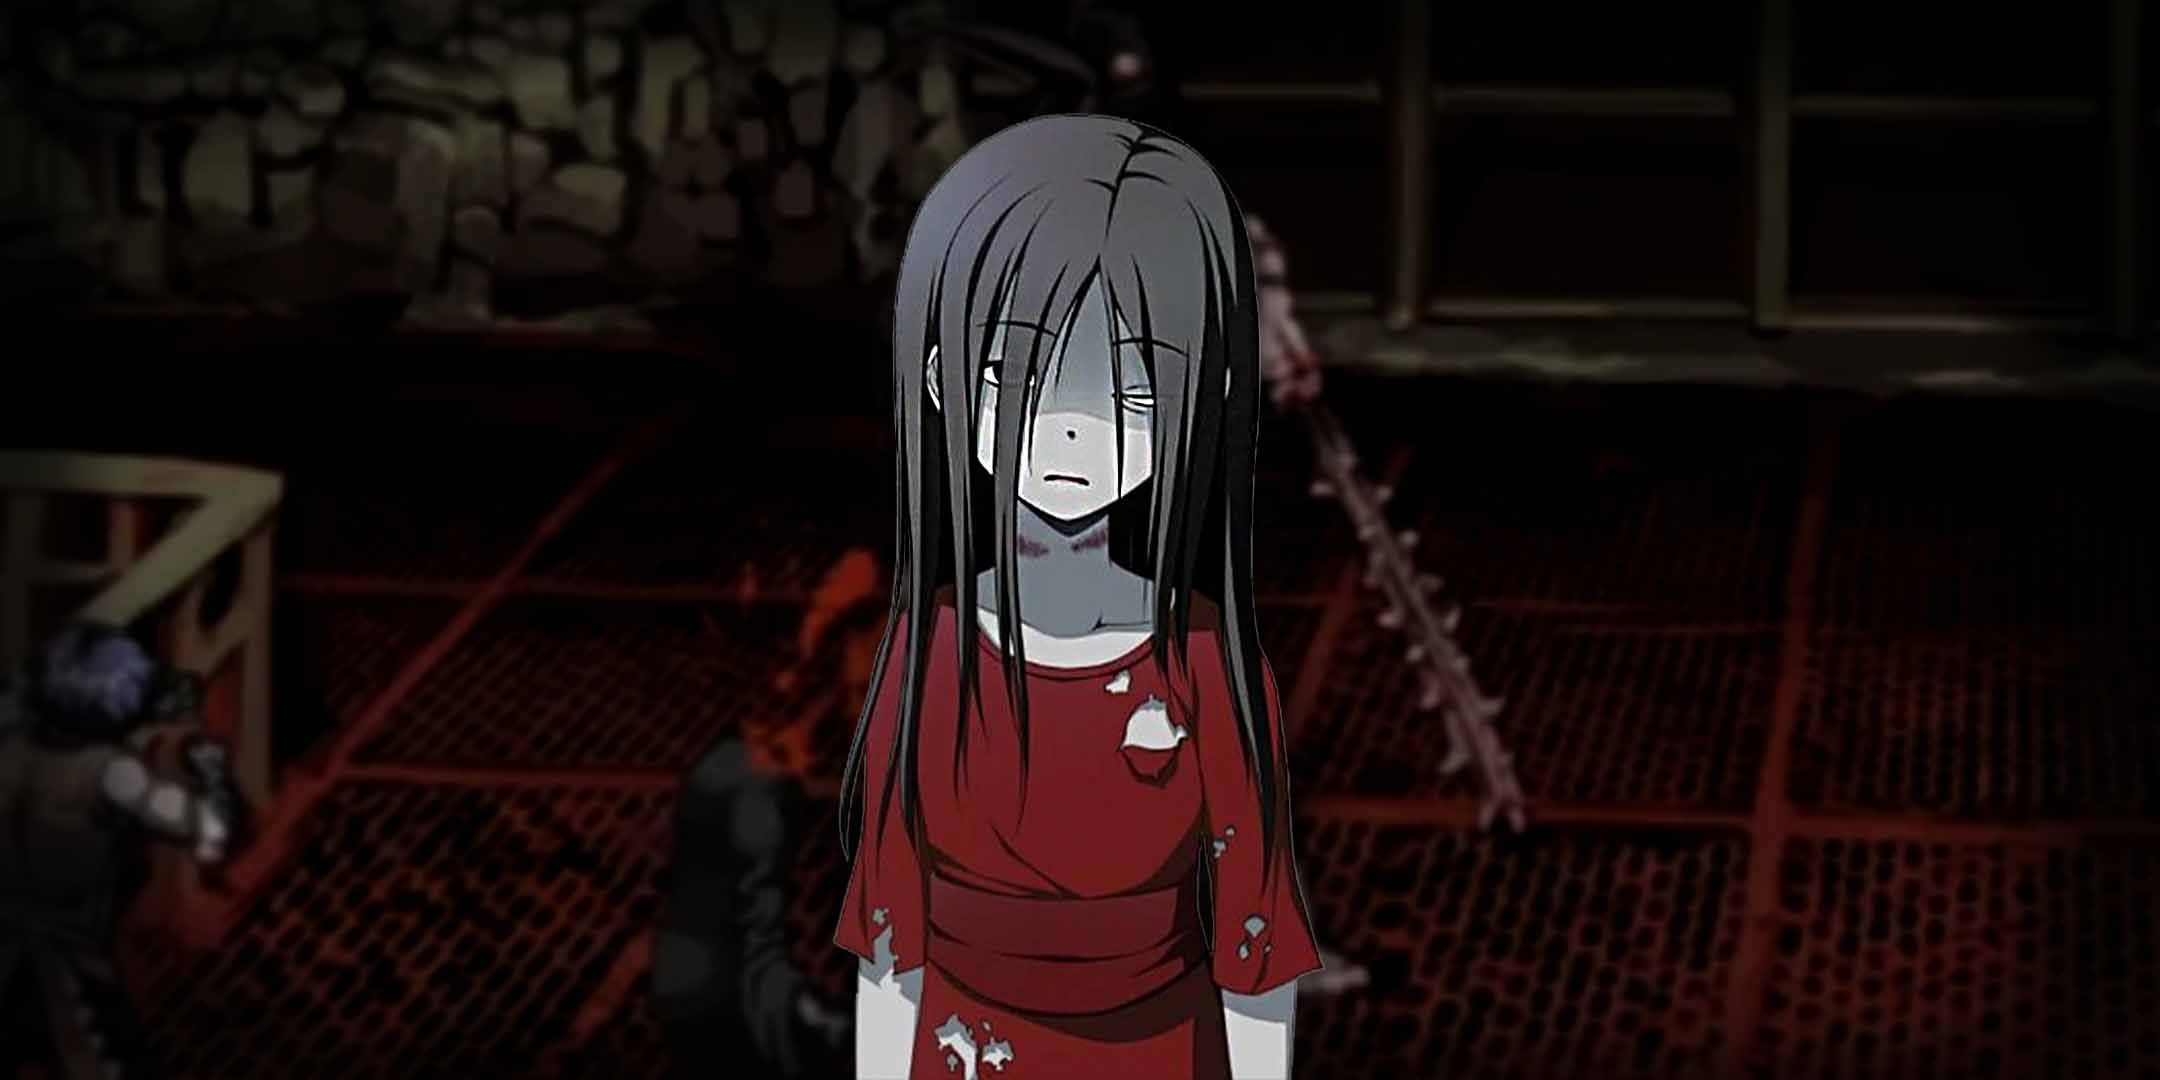 Creepy girl from Corpse Party staring at camera